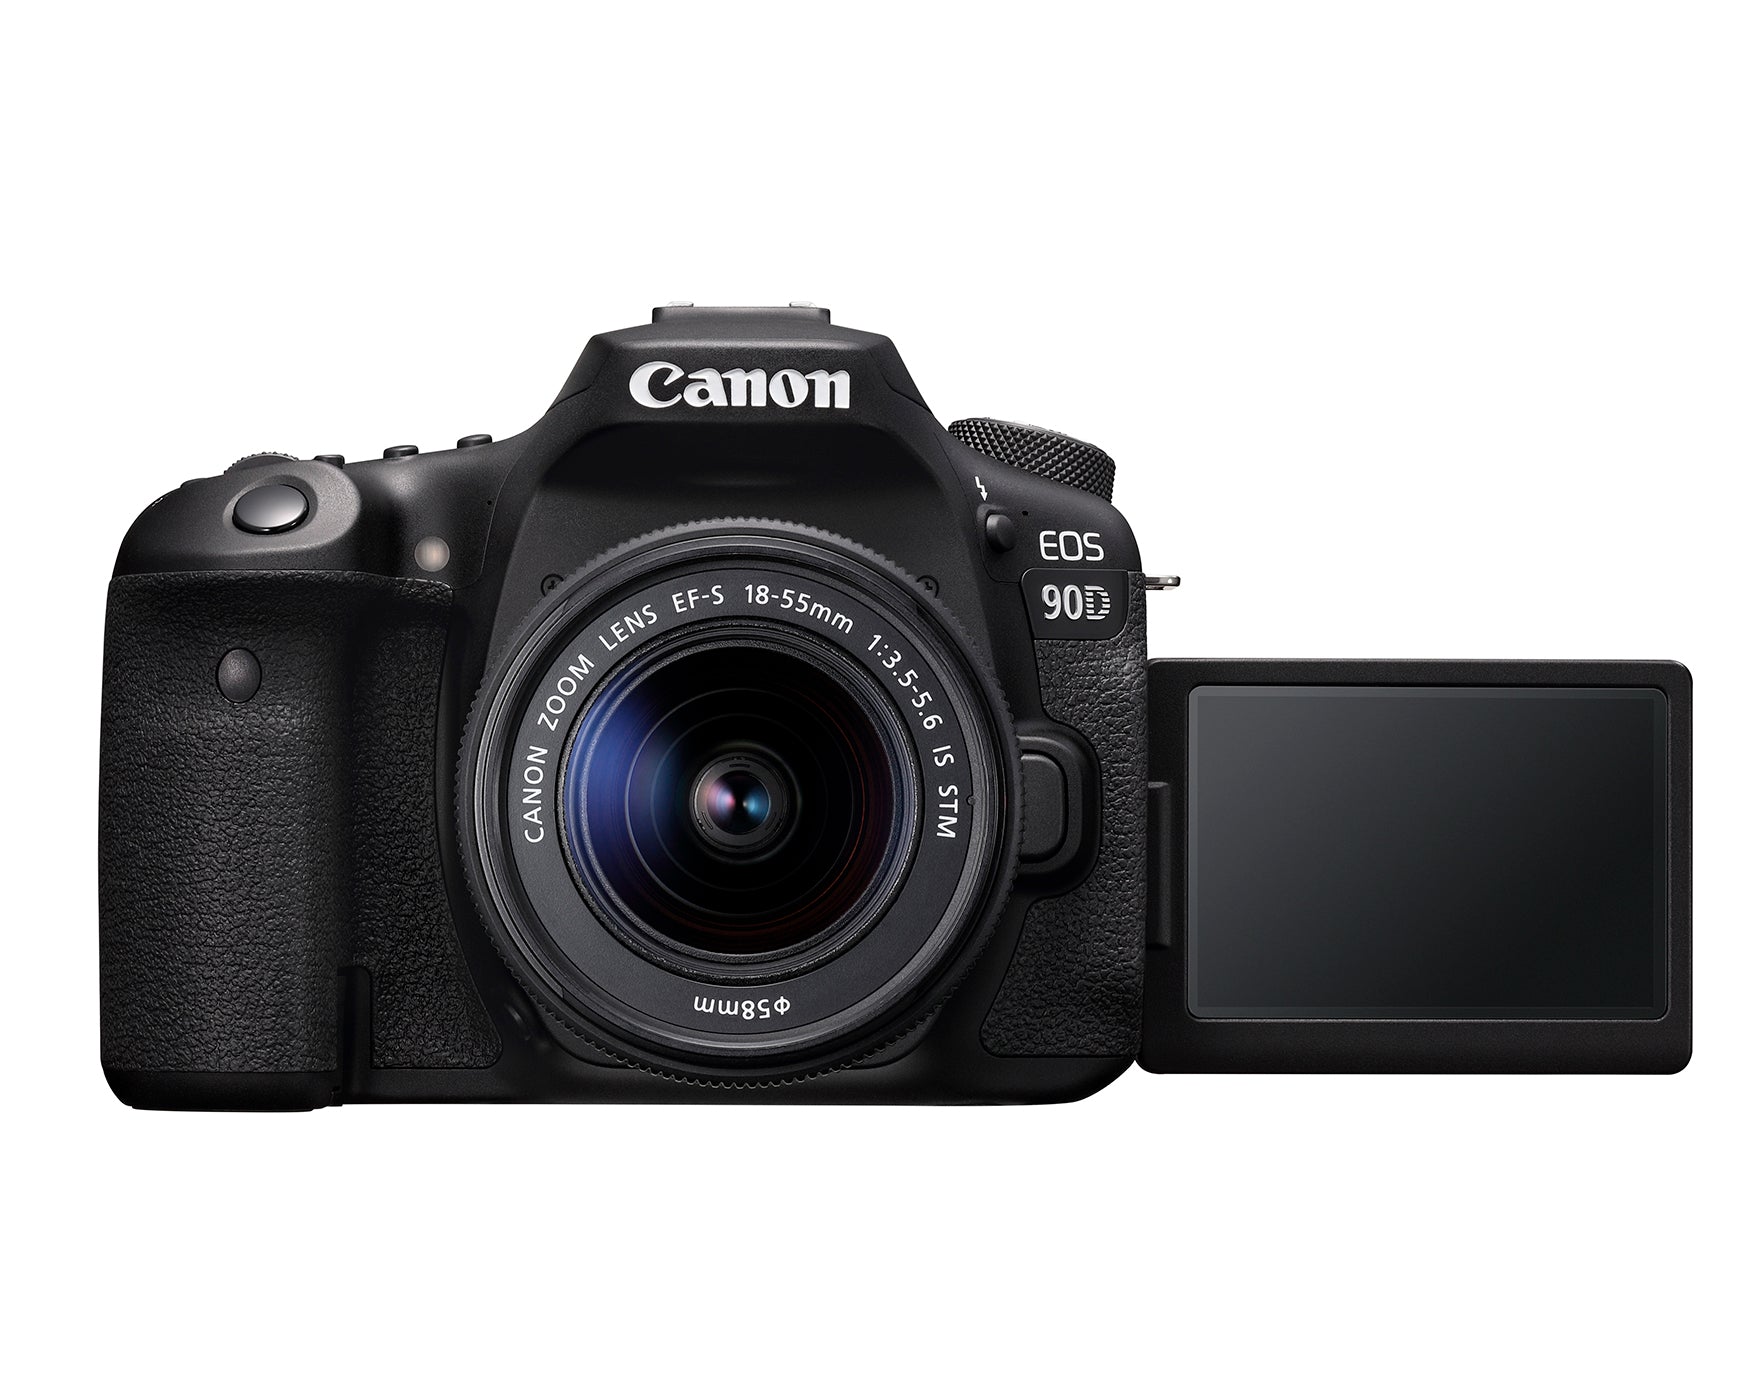 Canon EOS 90D DSLR Camera with 18-55mm IS STM Lens